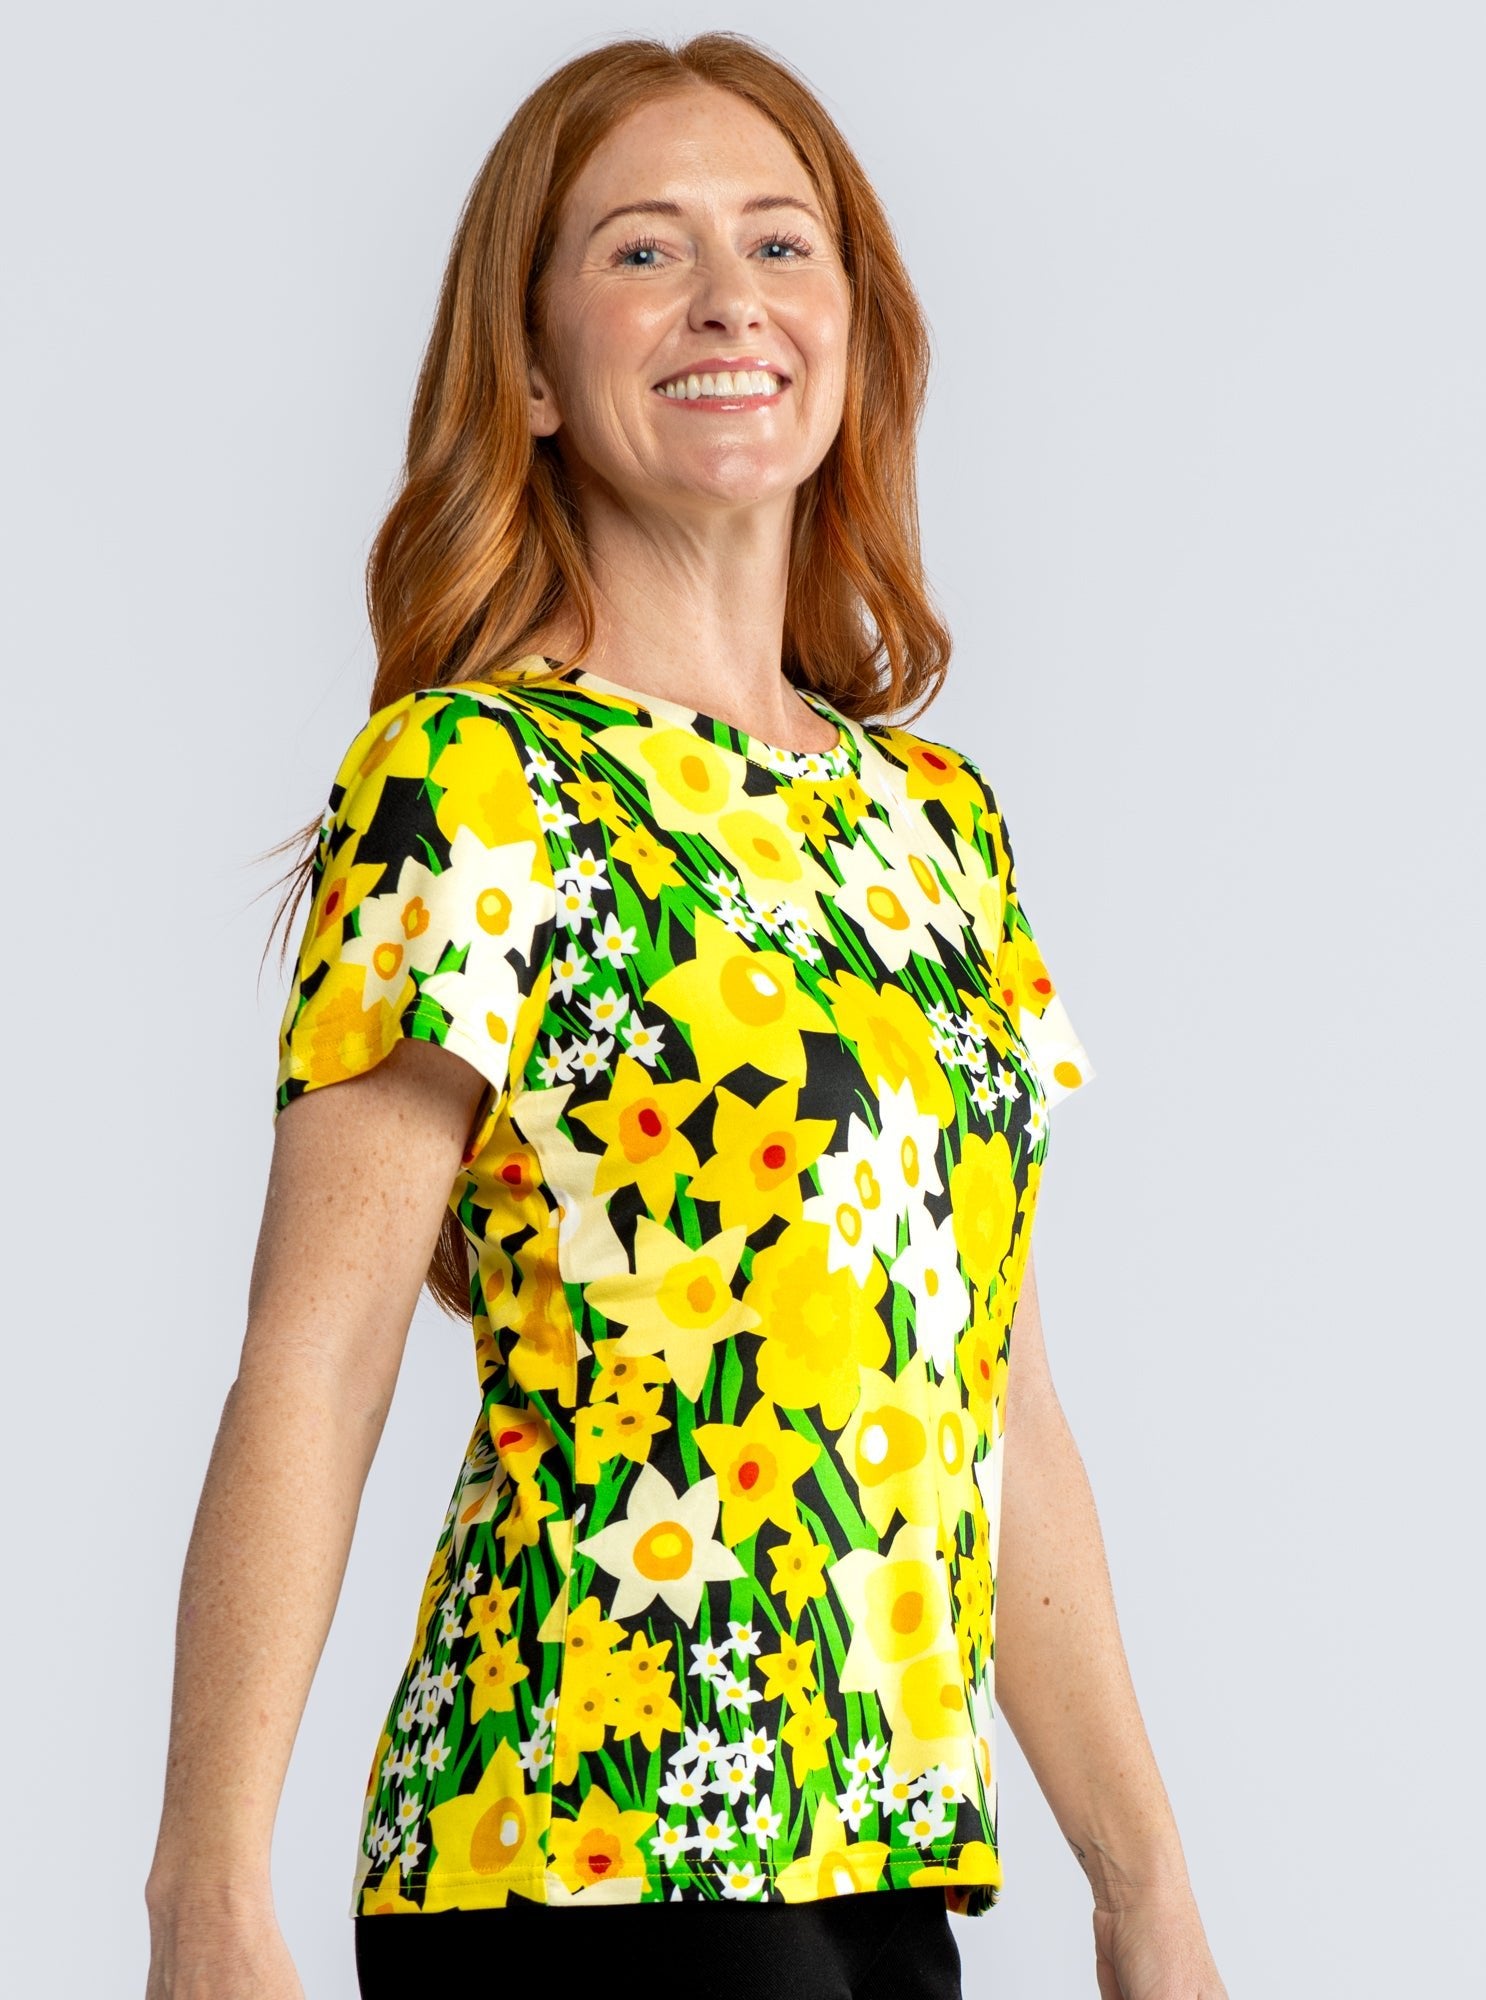 SUZI tee Daffodils - Lesley Evers-Best Seller-Shop-Shop/All Products